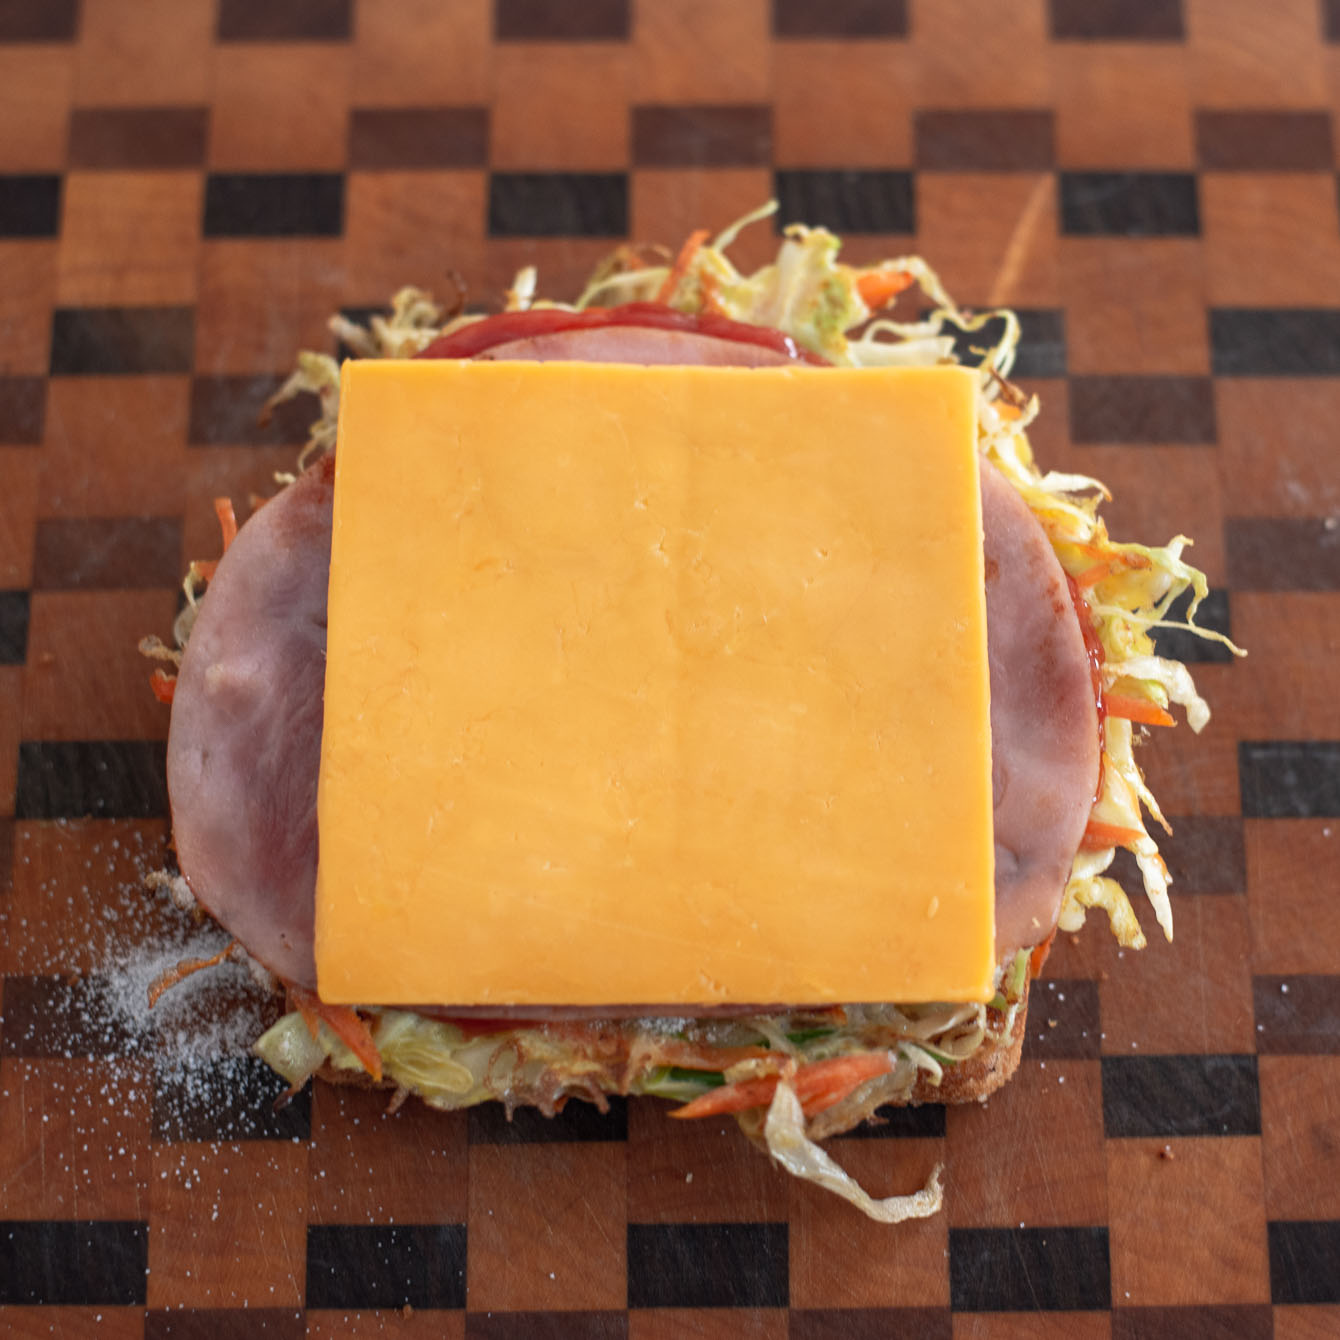 A slice of ham and cheese are used to assemble Korean street toast